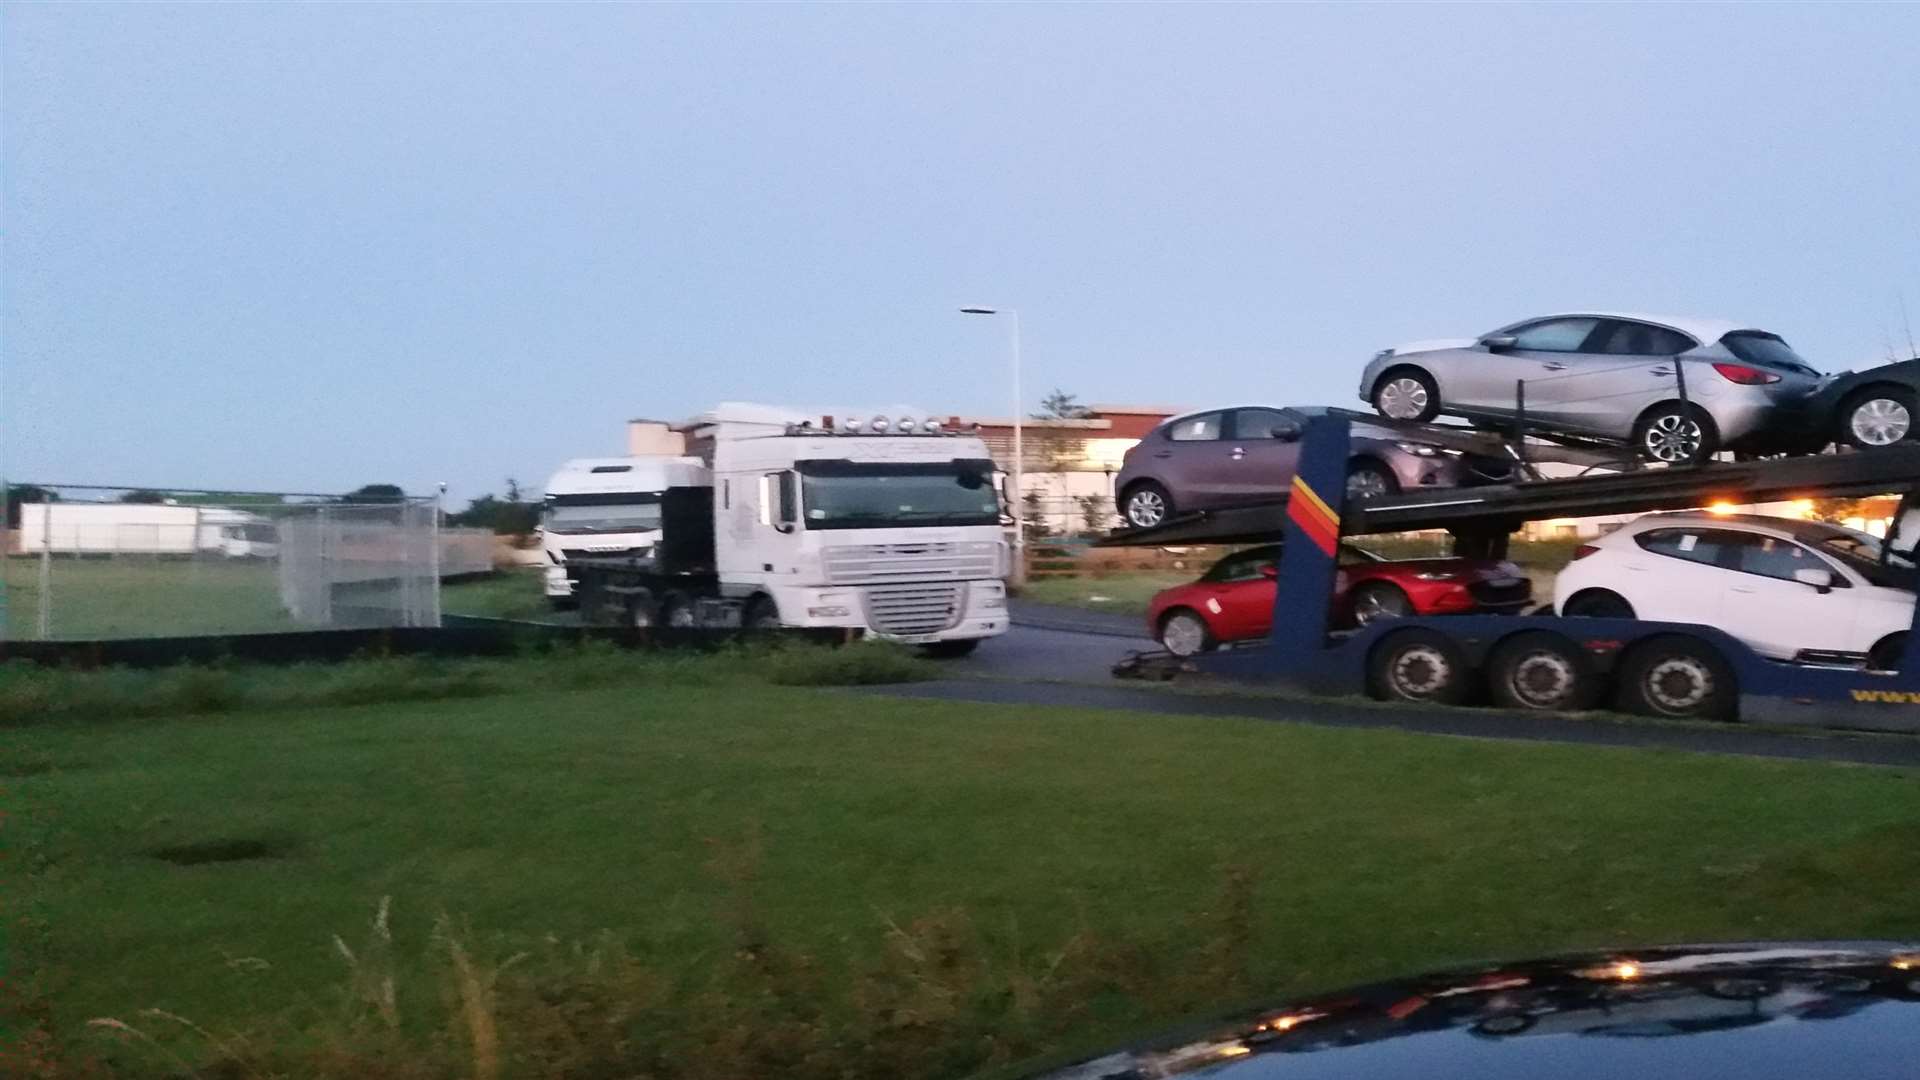 Eric Moloney took these photos of lorries parking outside his house in Hawkinge